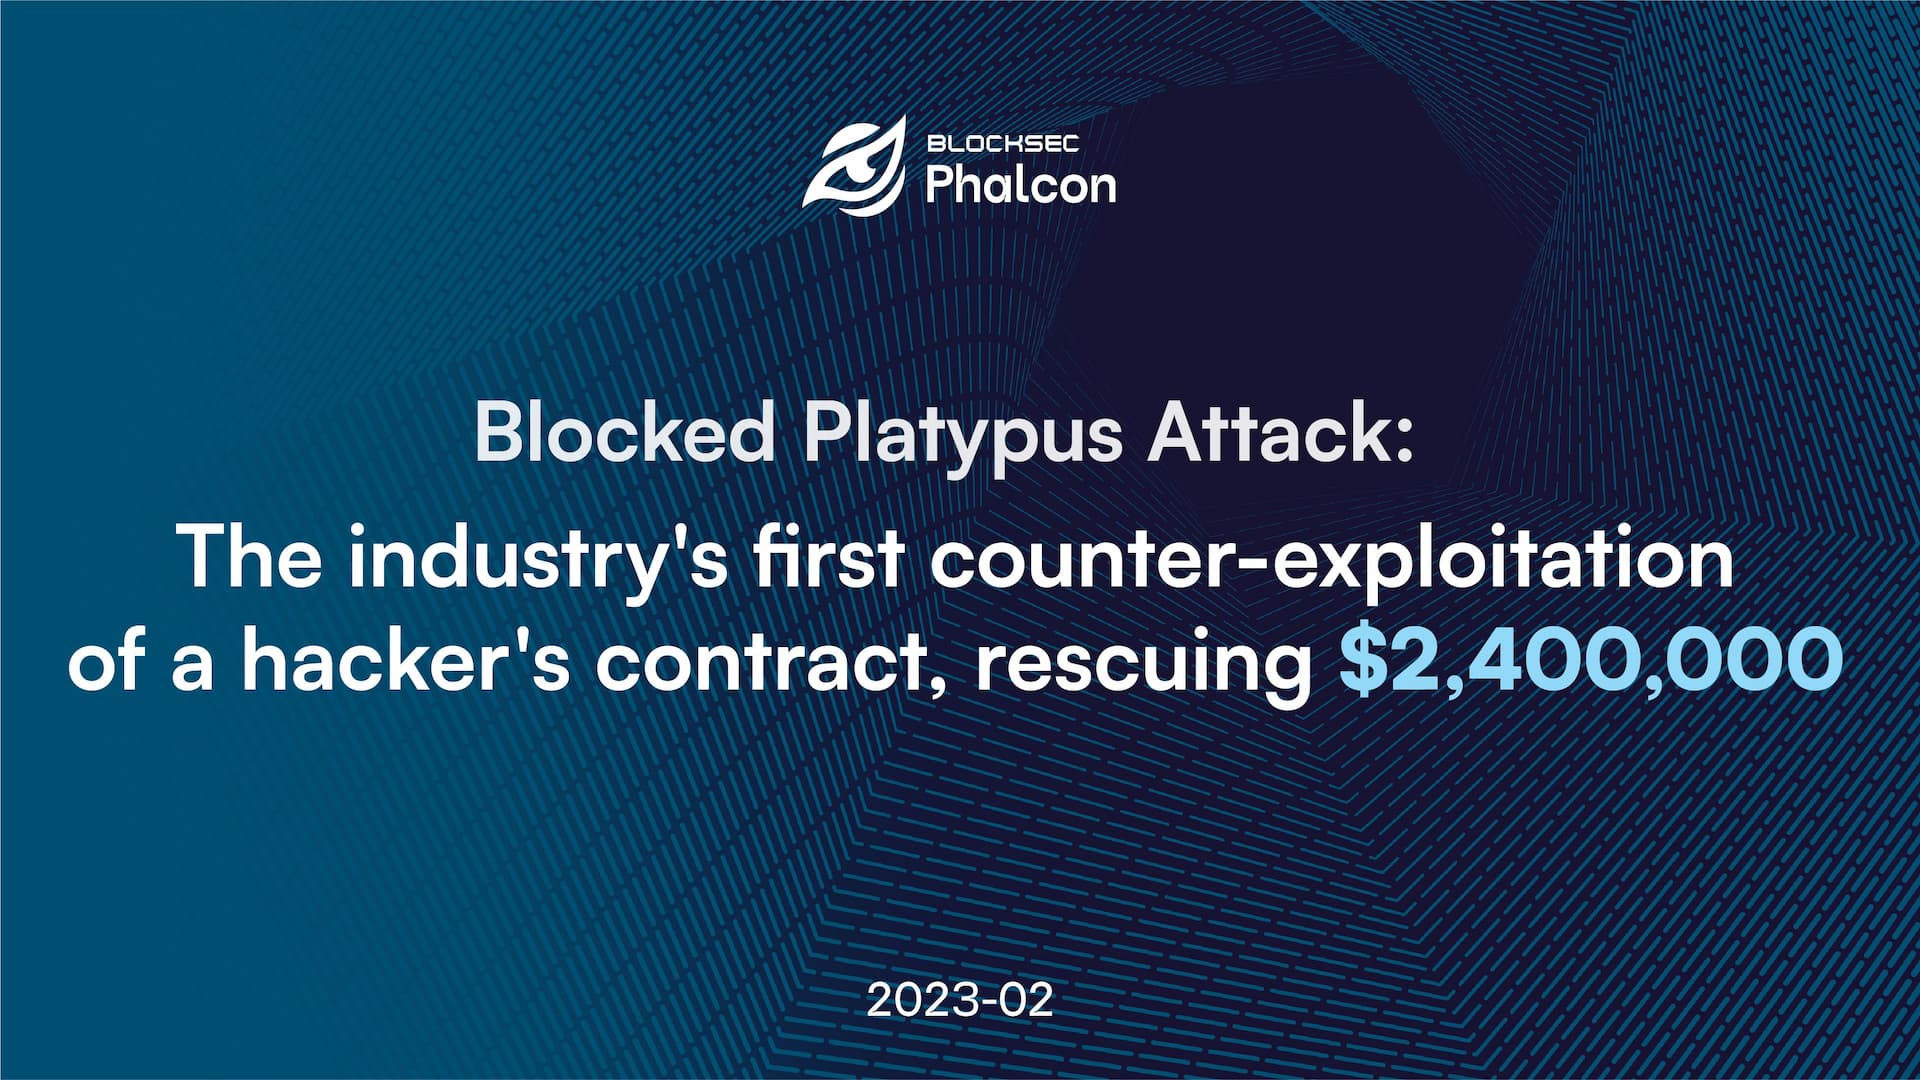 #5 Blocked Platypus Attack: Industry's First Counter-Exploitation of a Hacker's Contract